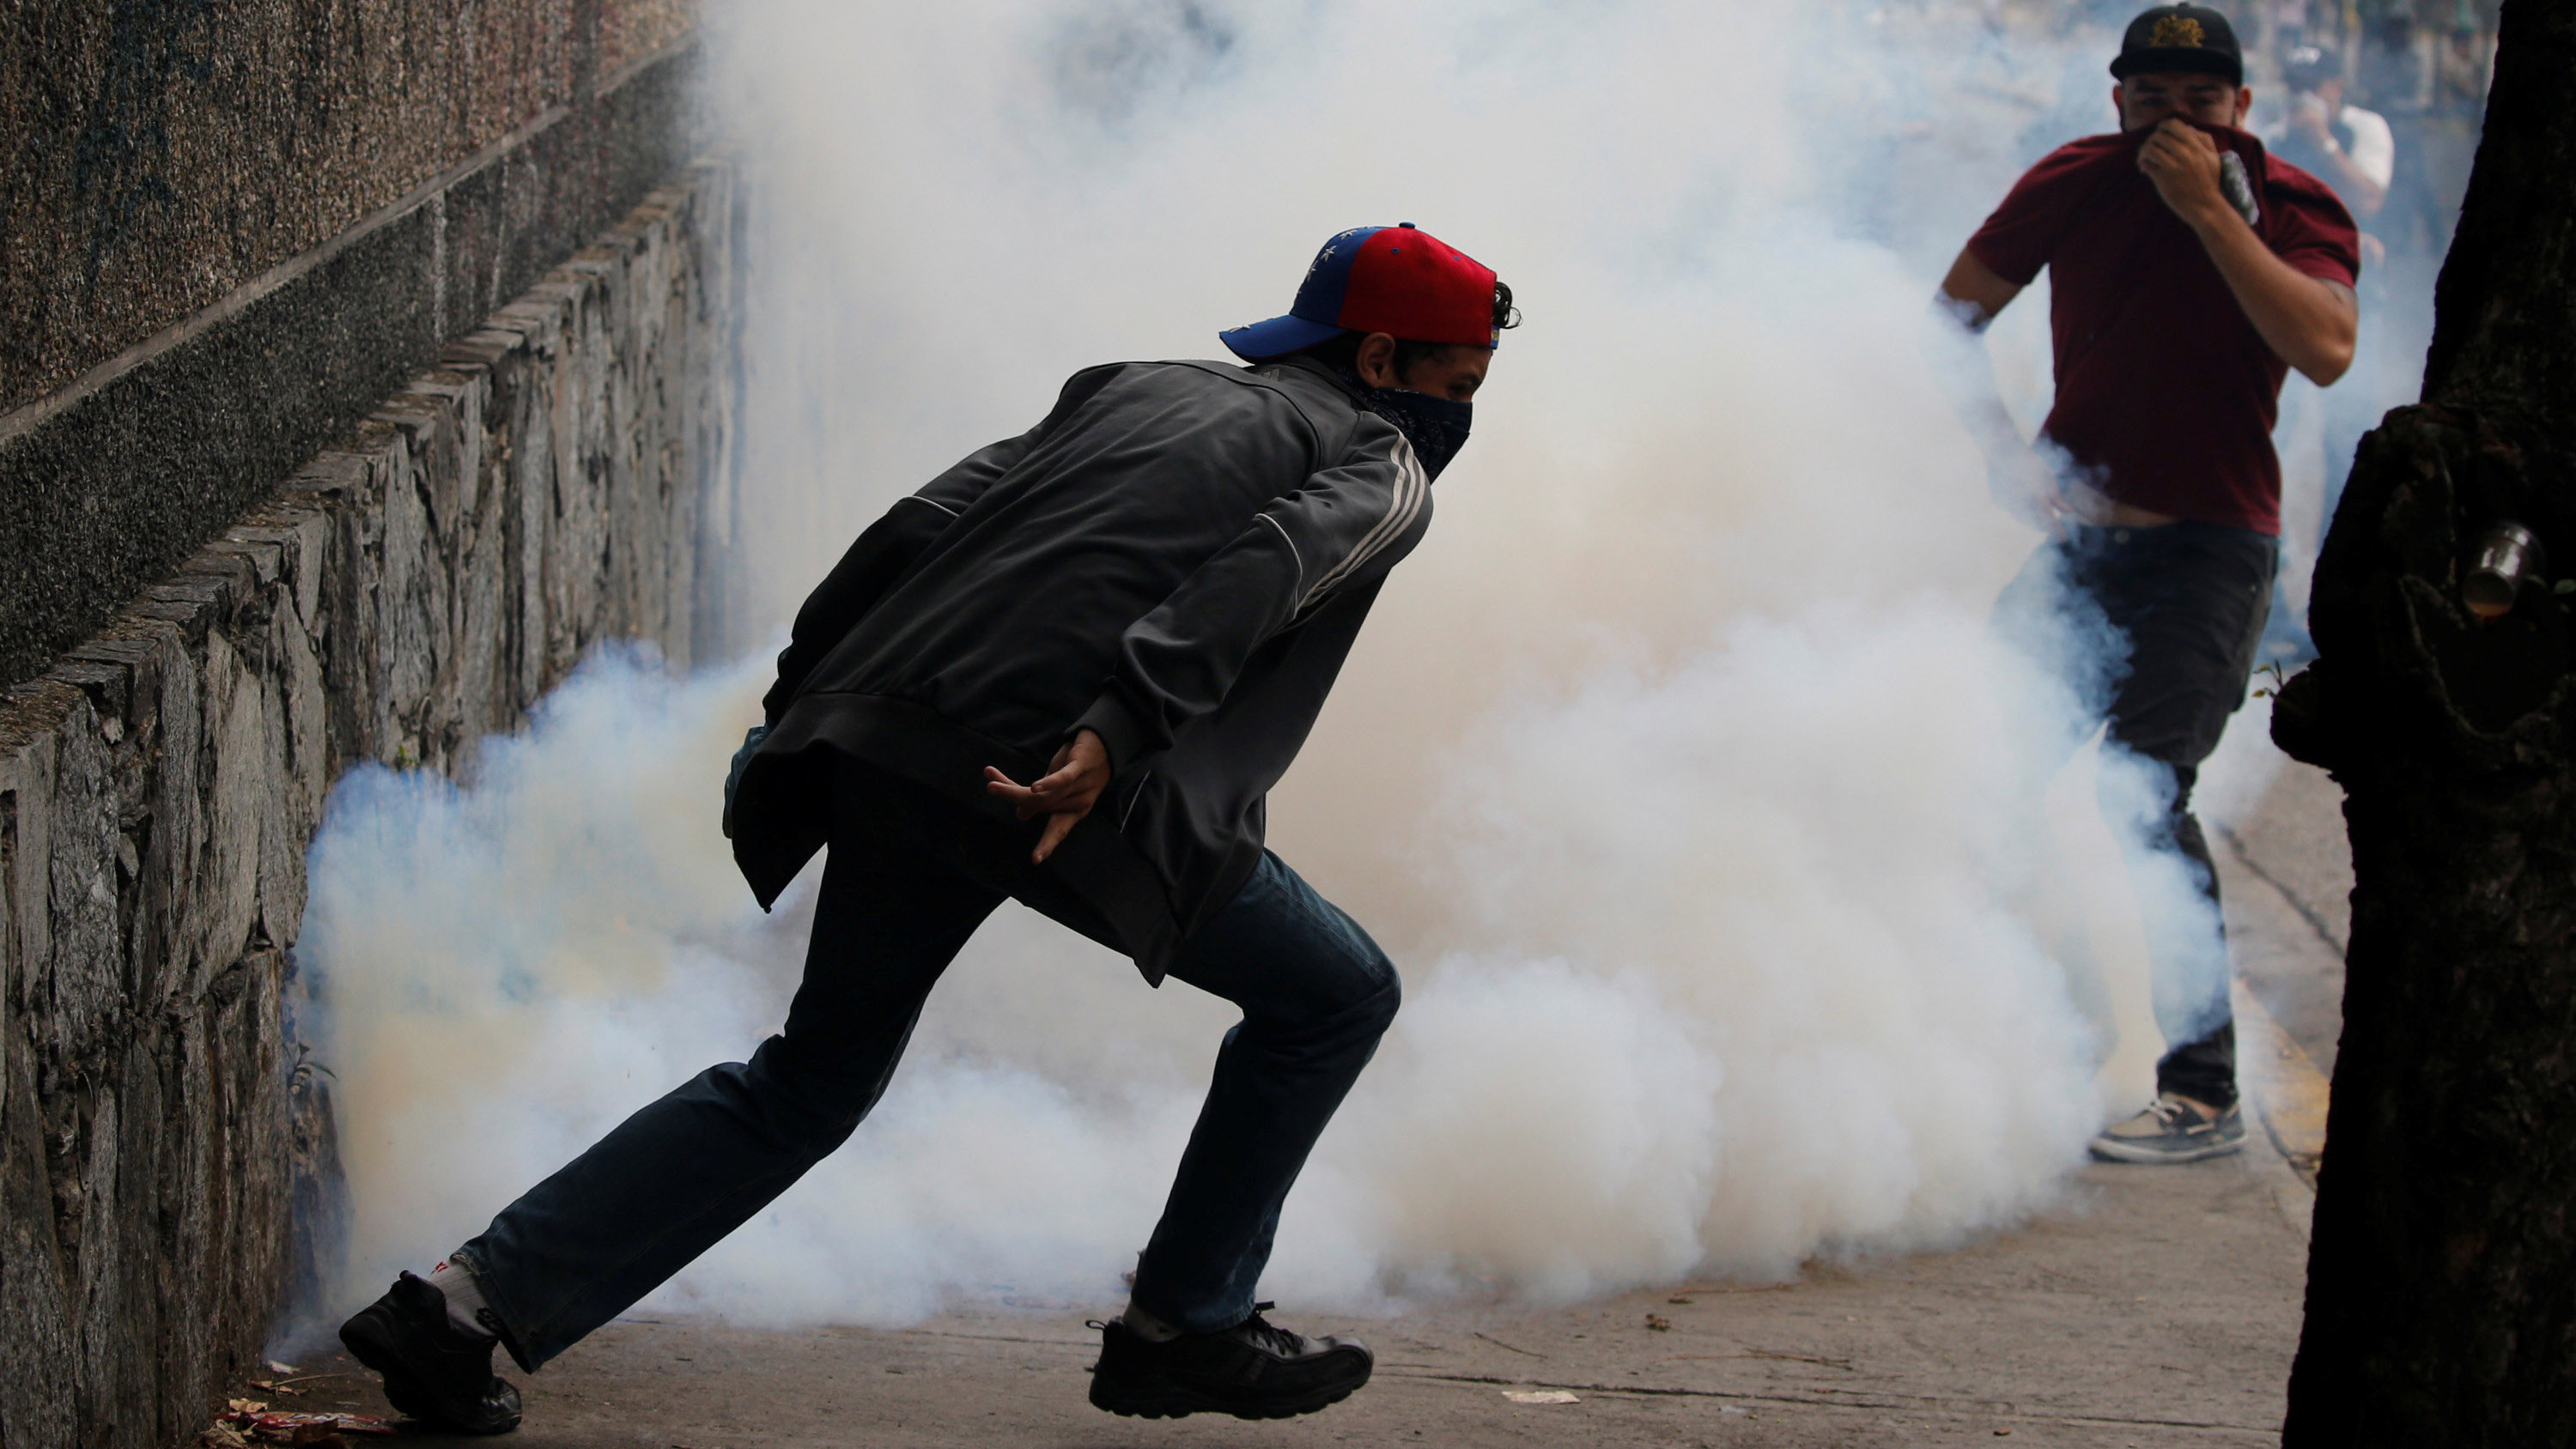 Demonstrators run away from tear gas during a protest against Venezuela's President Nicolas Maduro's government in Caracas, Venezuela May 2, 2017. REUTERS/Carlos Garcia Rawlins